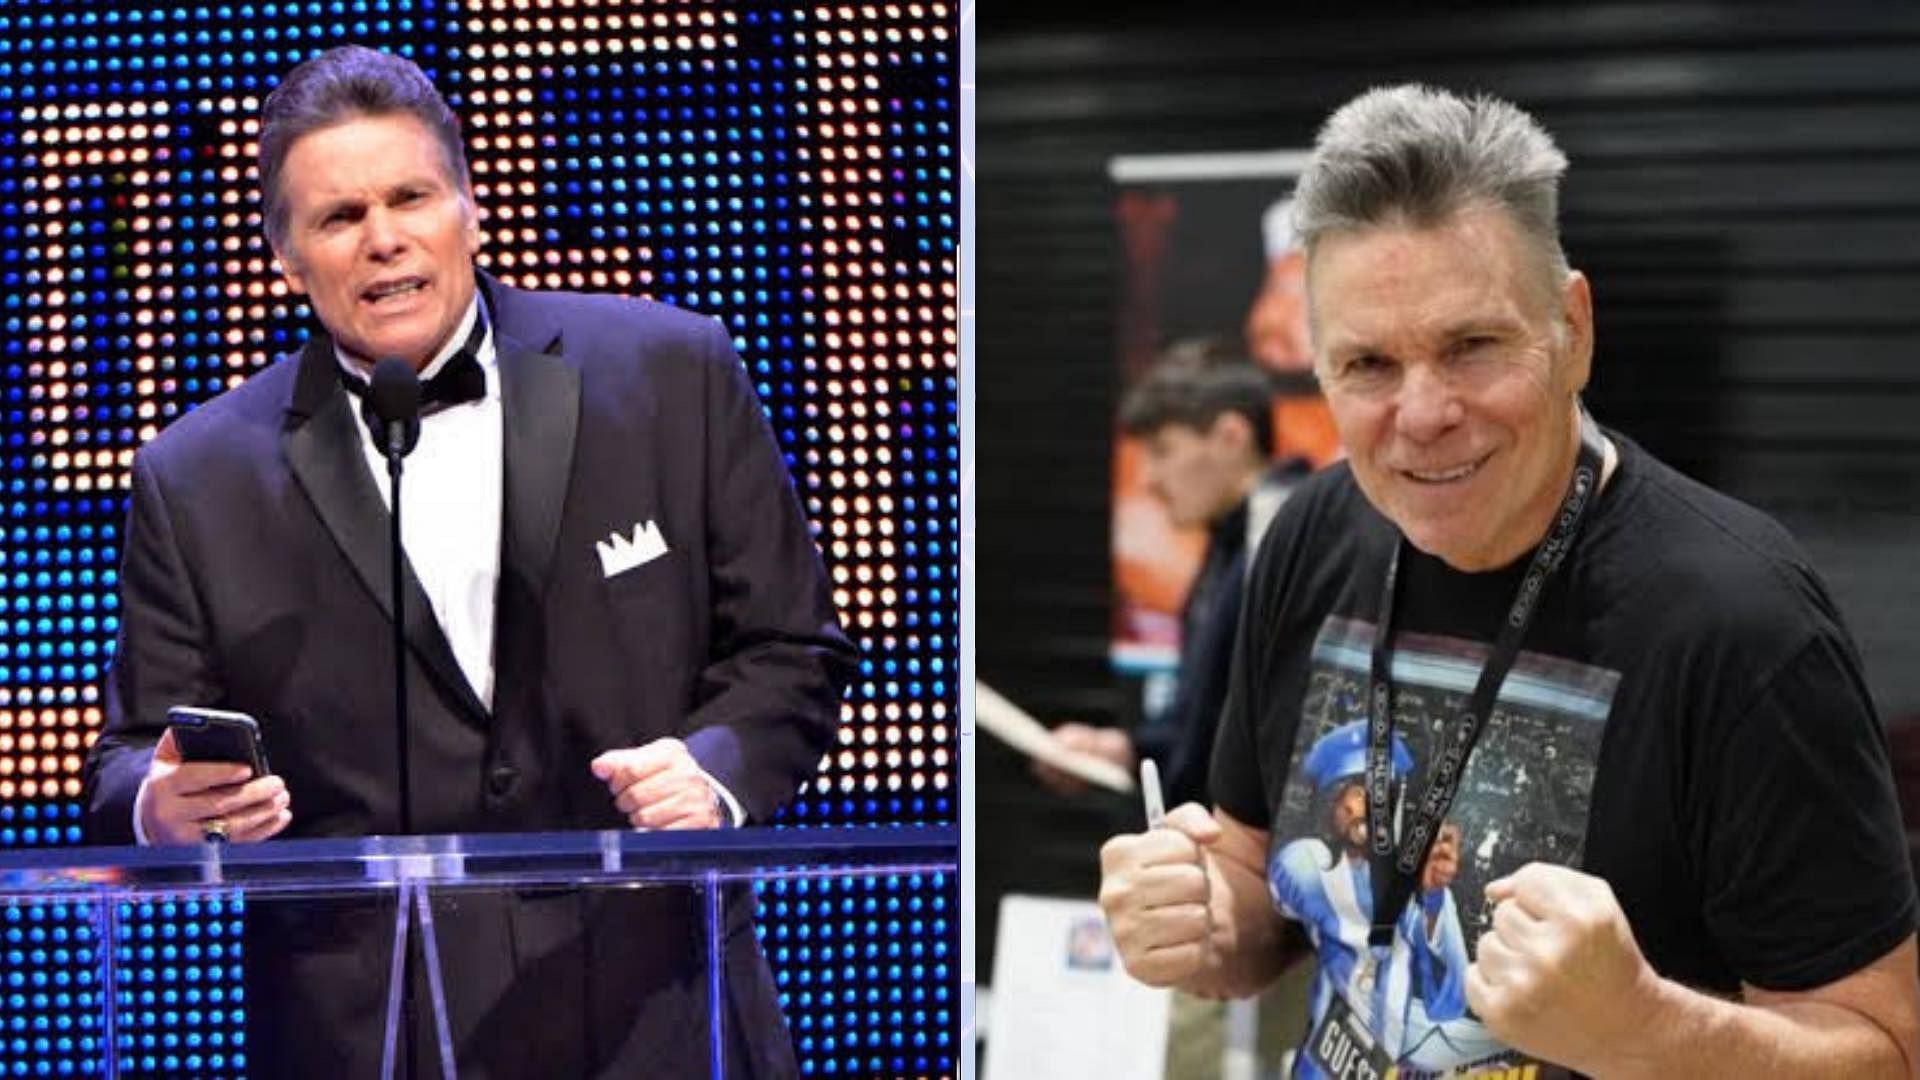 41-year-old commentator pays a heartwarming tribute to the passing of WWE legend Lanny Poffo